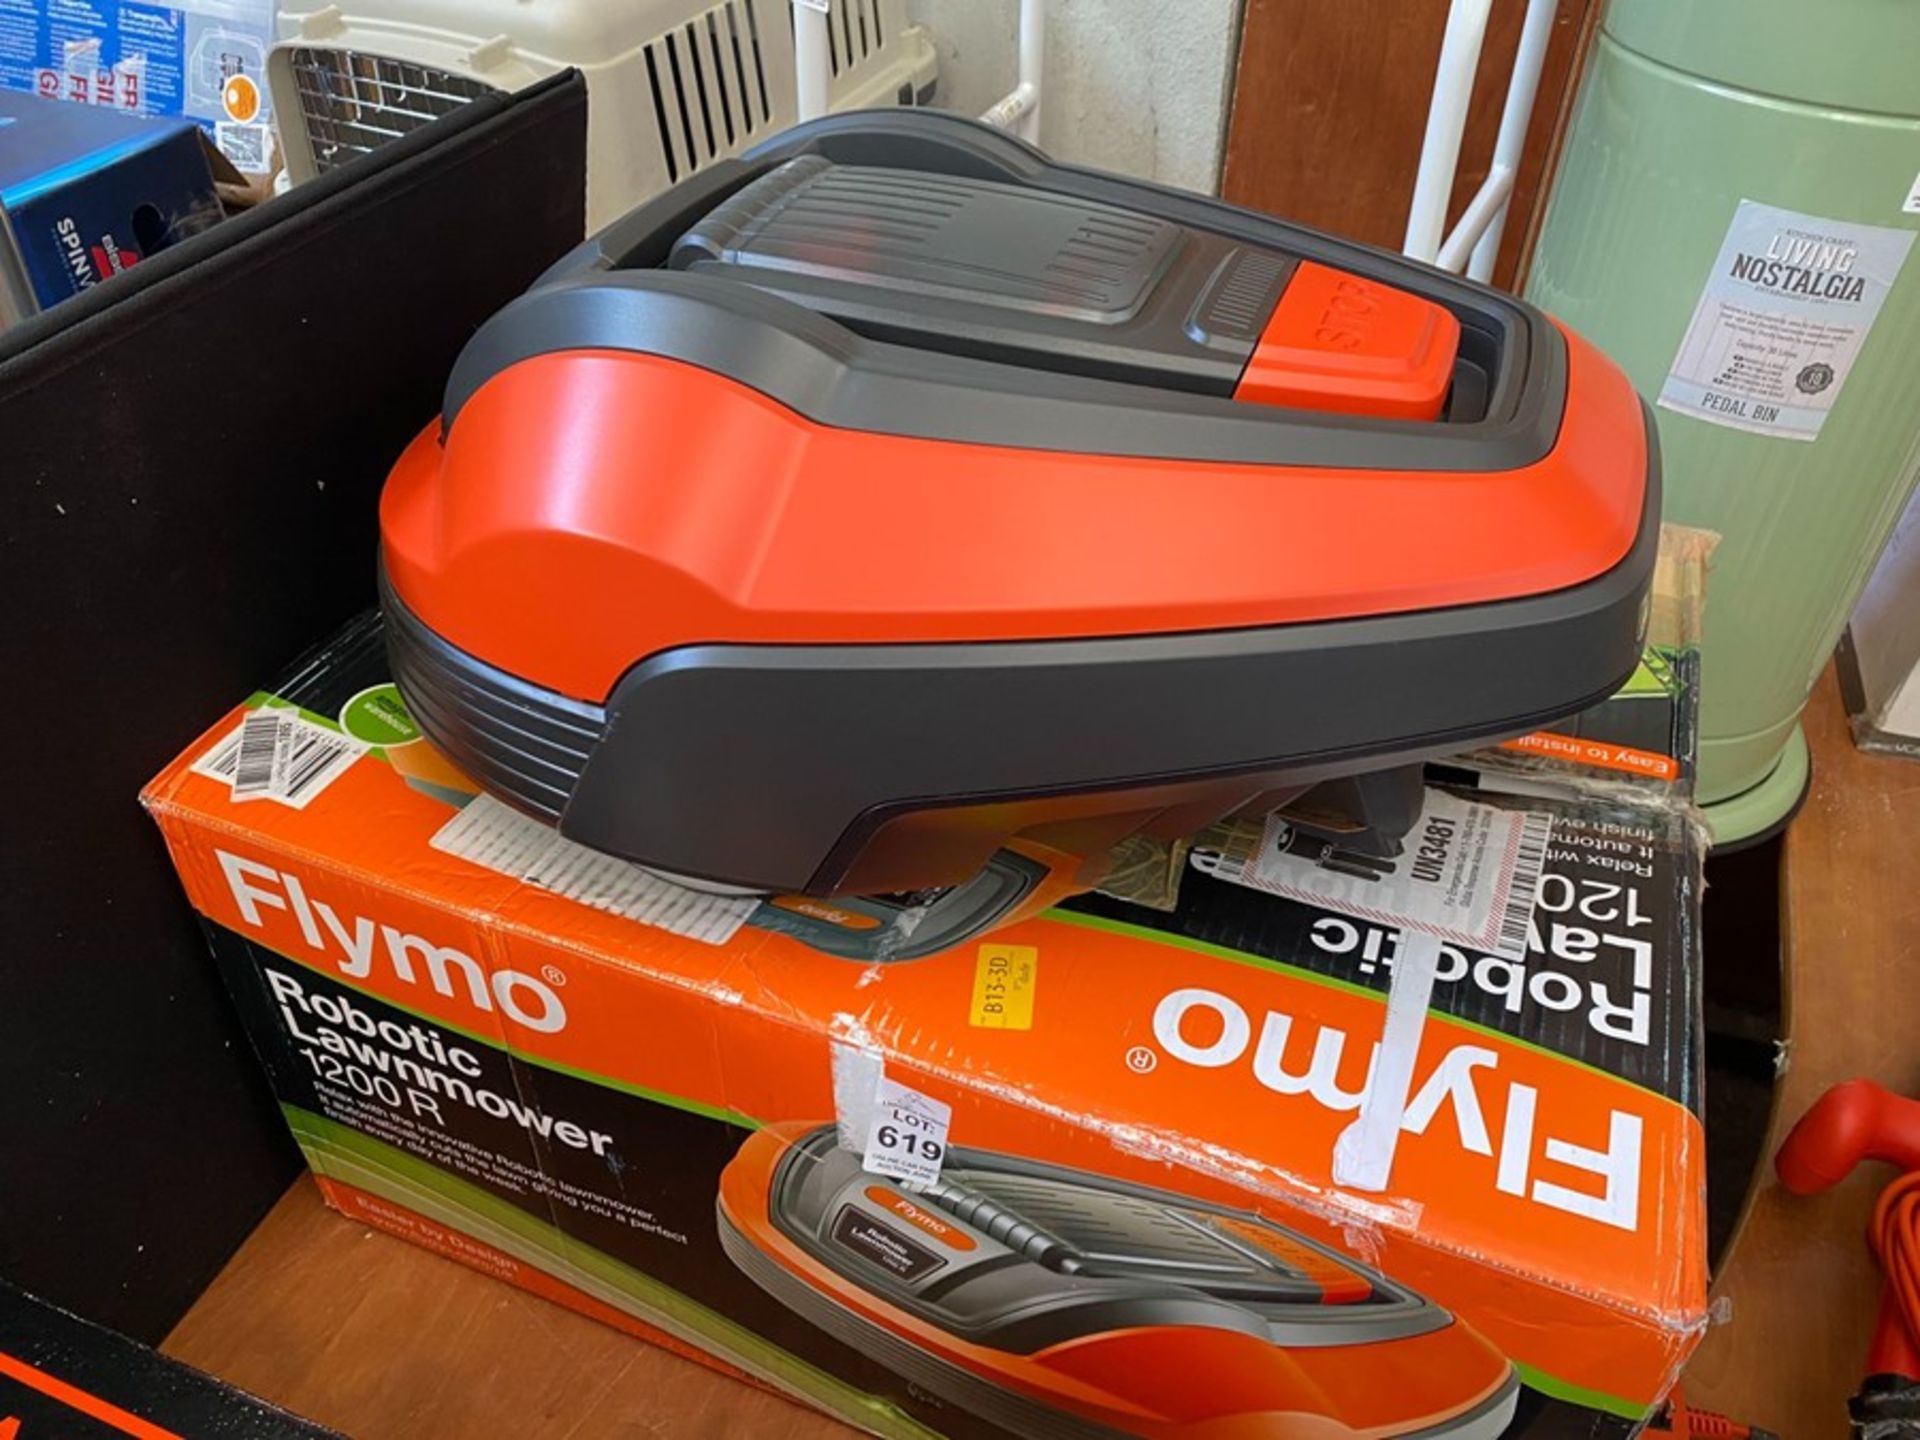 FLYMO ROBOTIC LITHIUM-ION LAWNMOWER 1200R (WORKING)